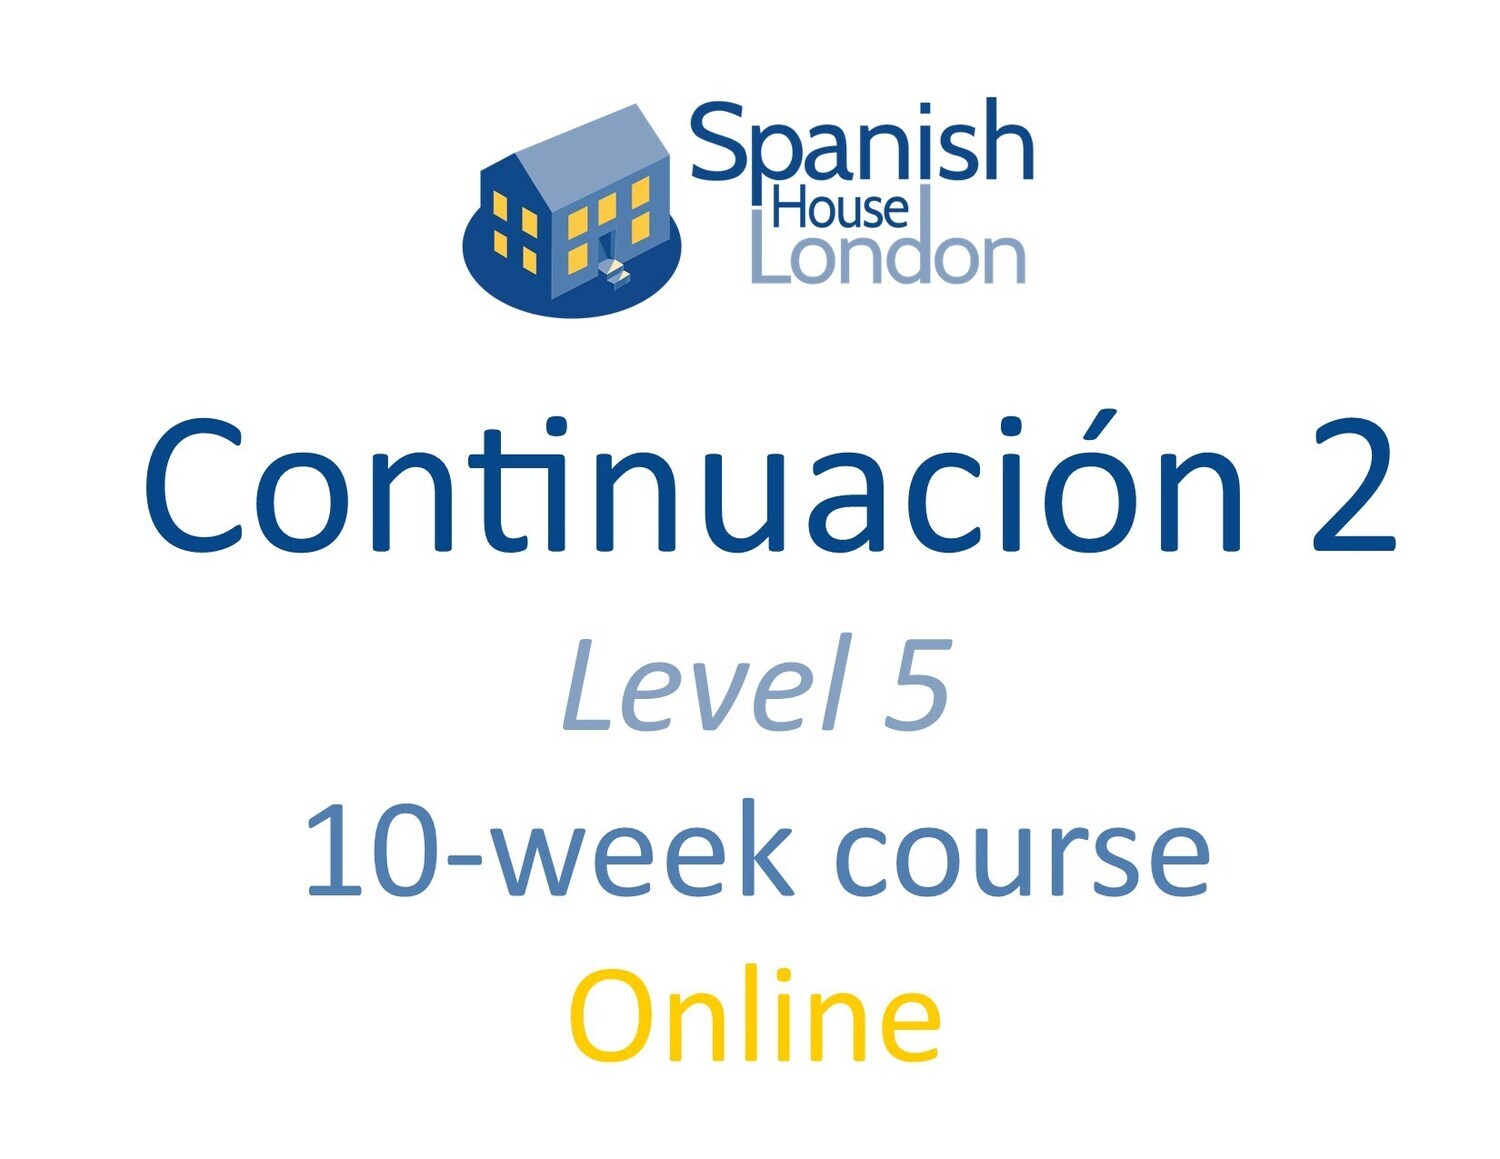 Continuacion 2 Course starting on 13th May at 7.30am Online